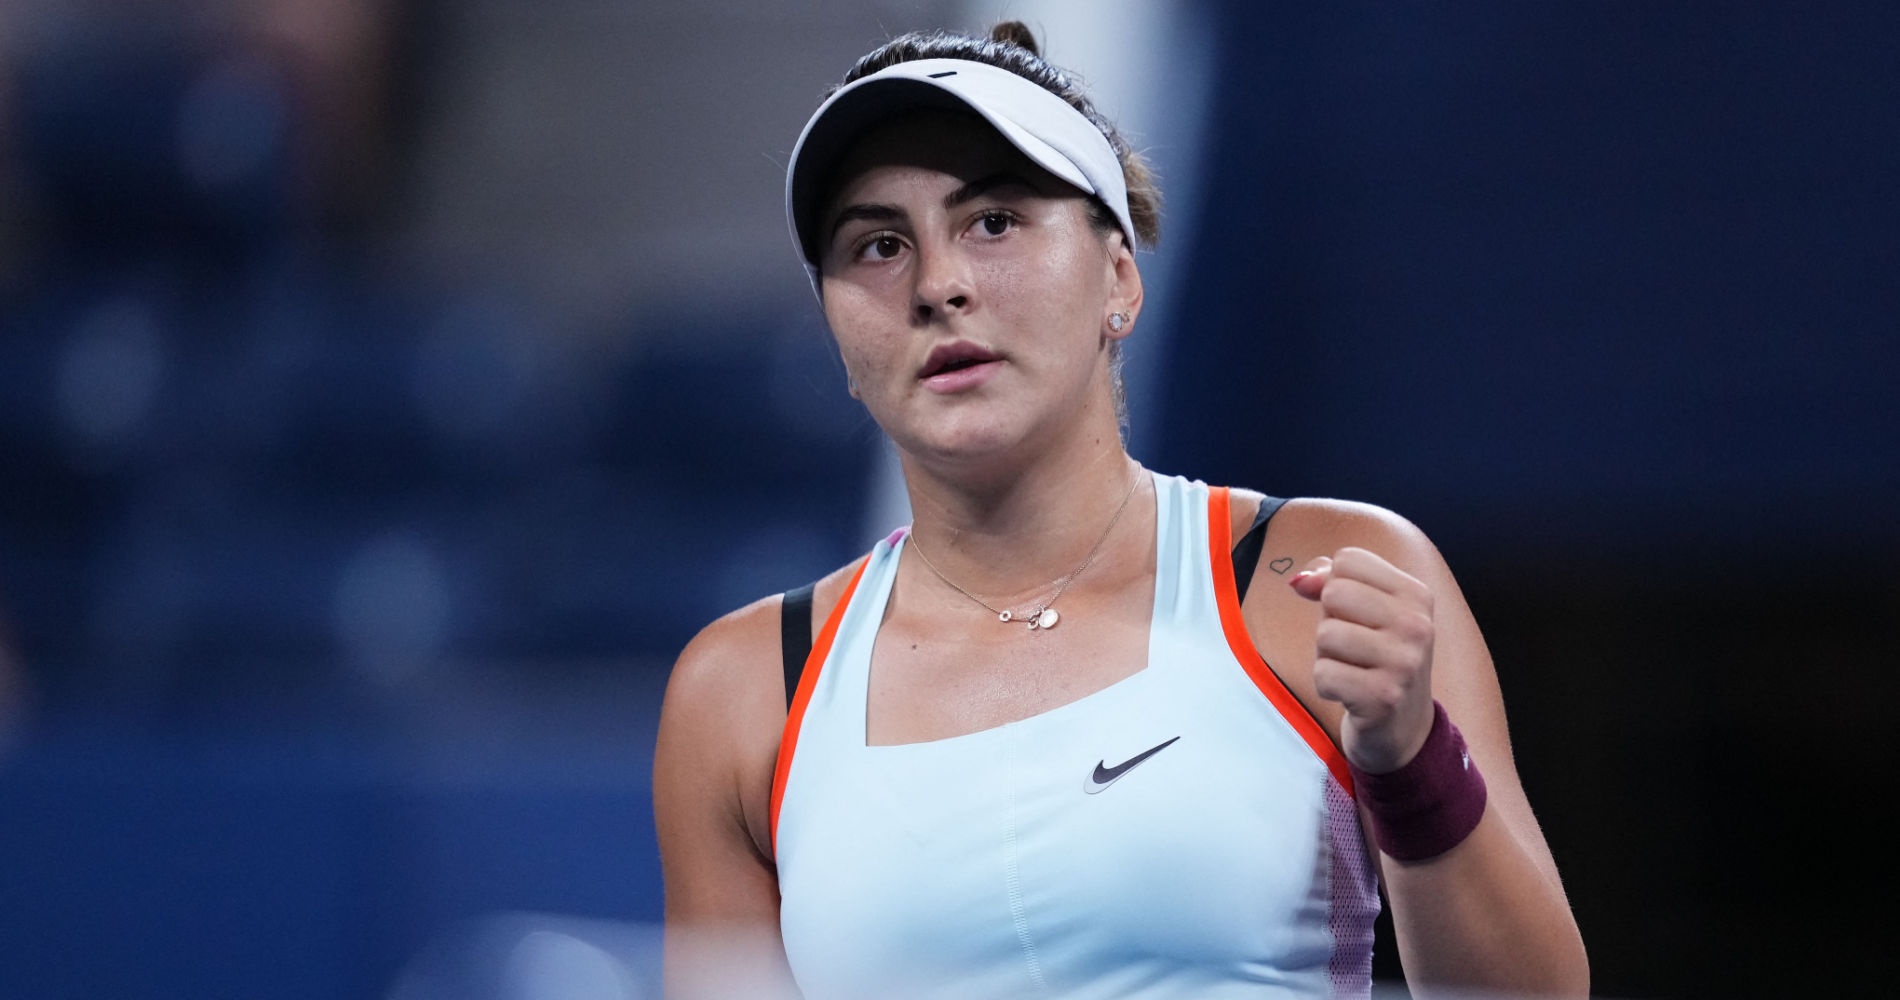 Bianca Andreescu and coach Sven Groeneveld have parted ways